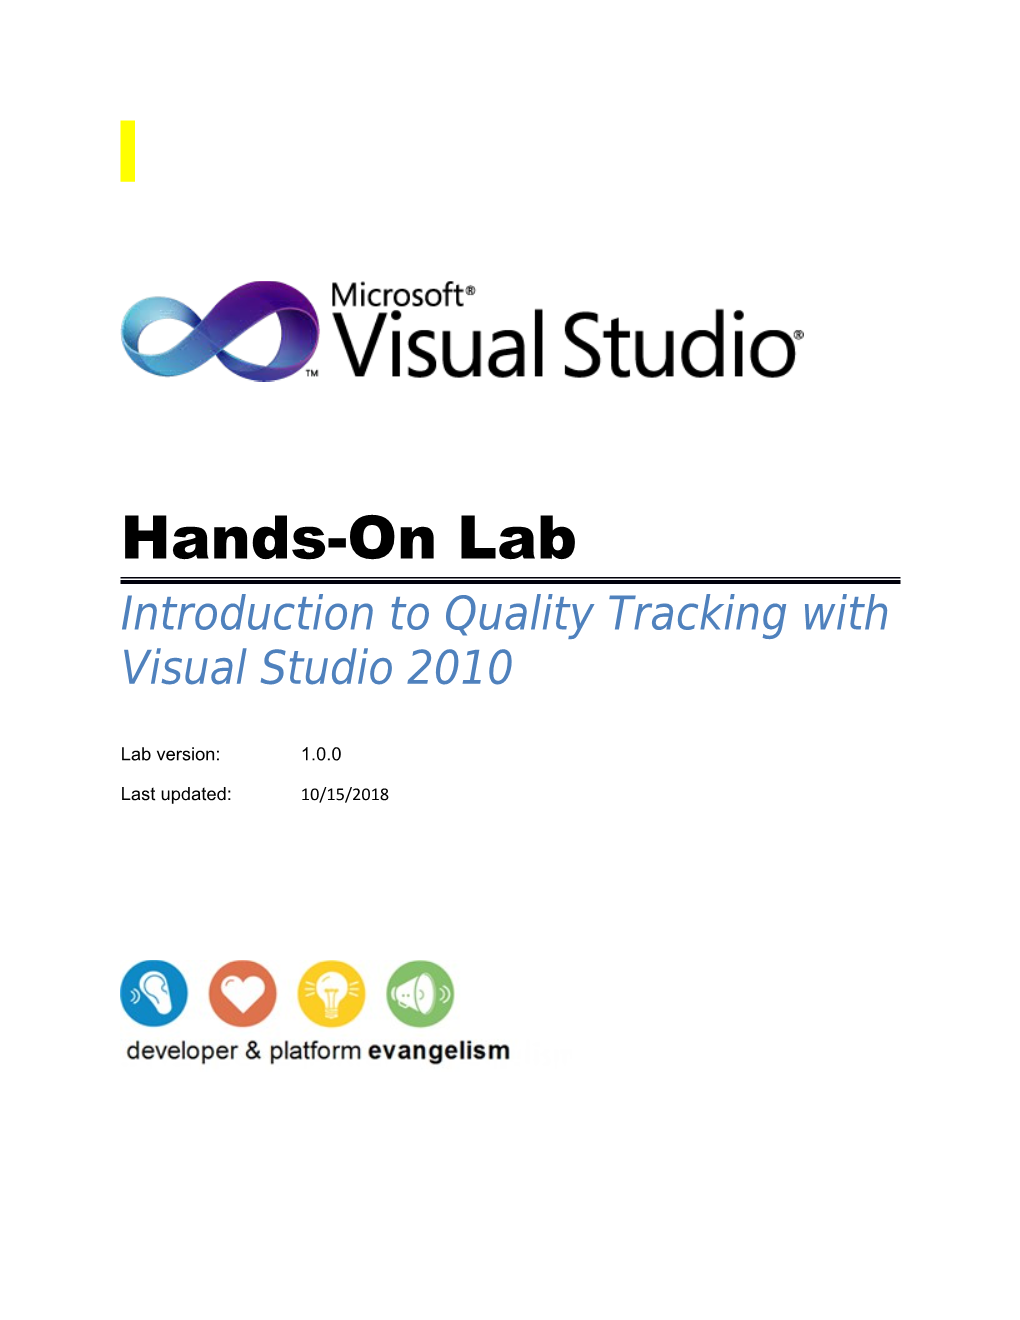 Introduction to Quality Tracking with Visual Studio 2010